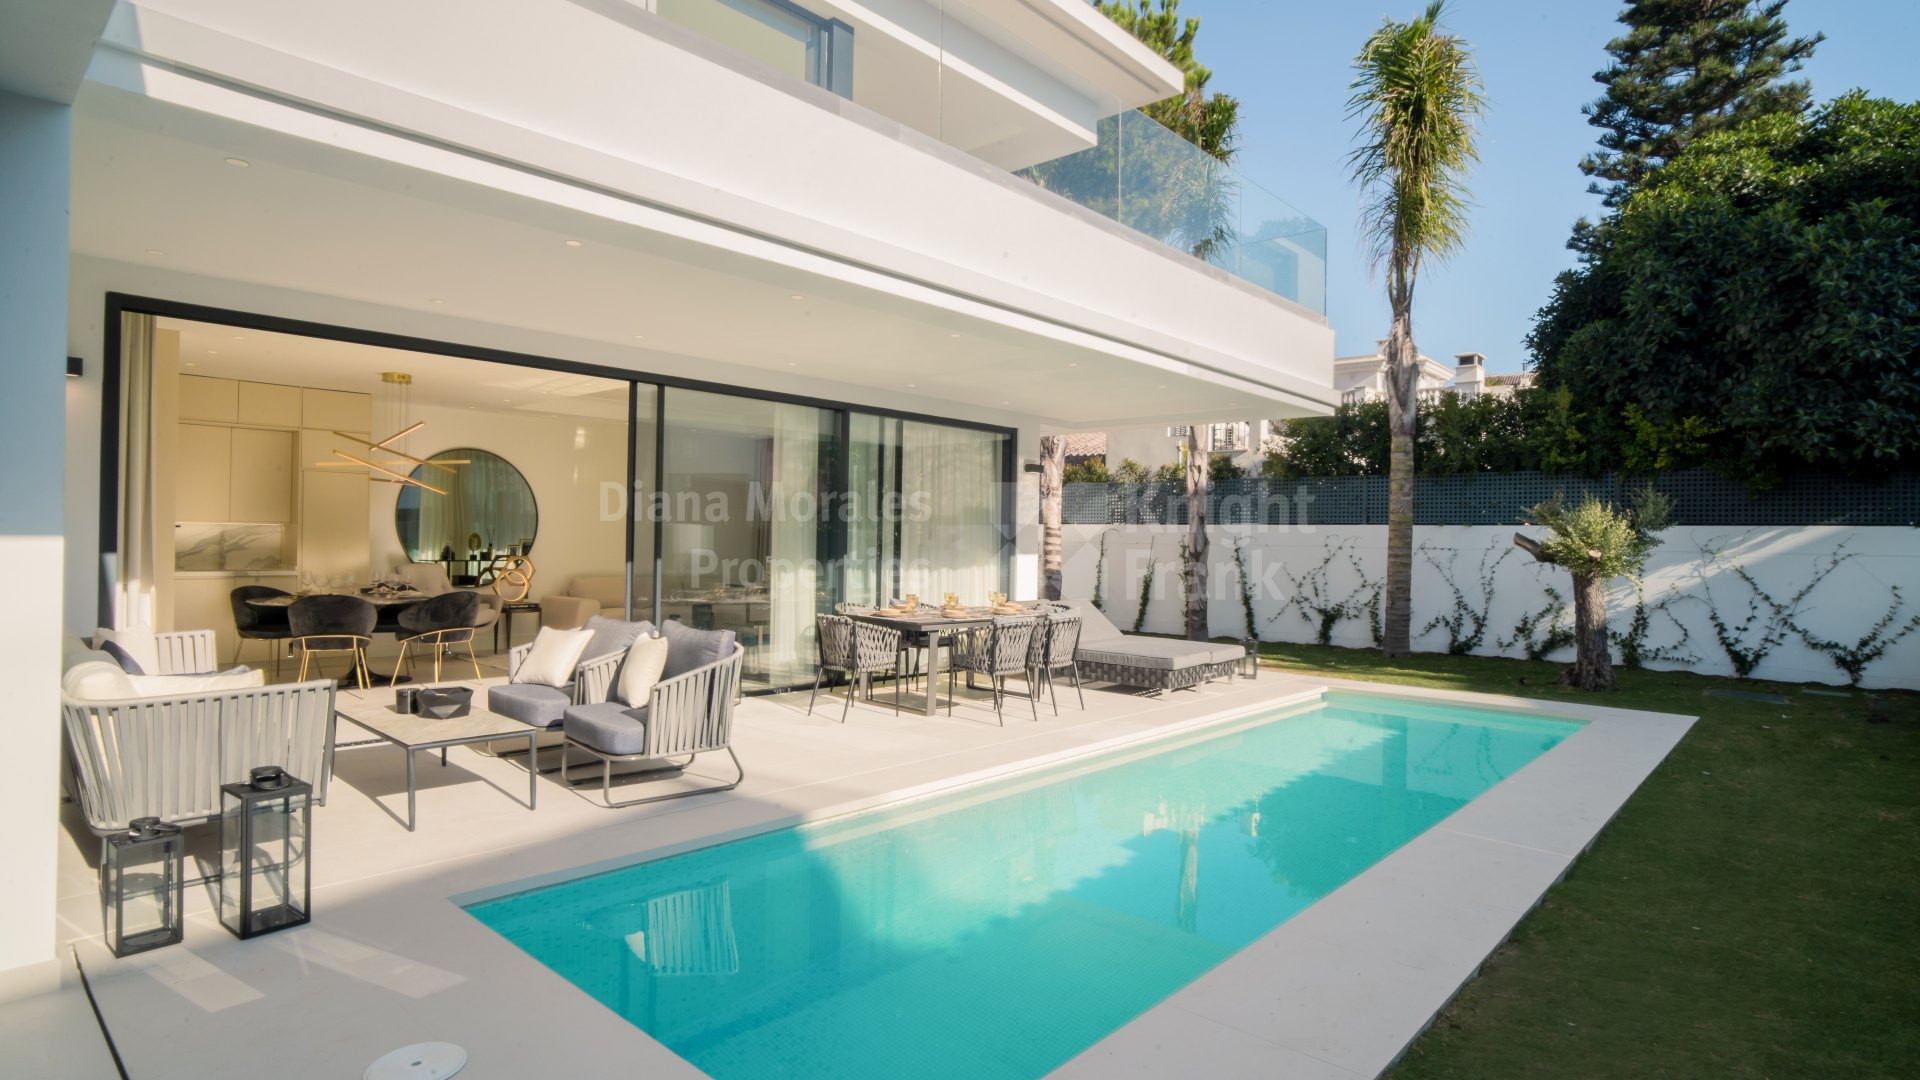 Rio Verde Playa, One out of a 4-unit development next to Puerto Banús